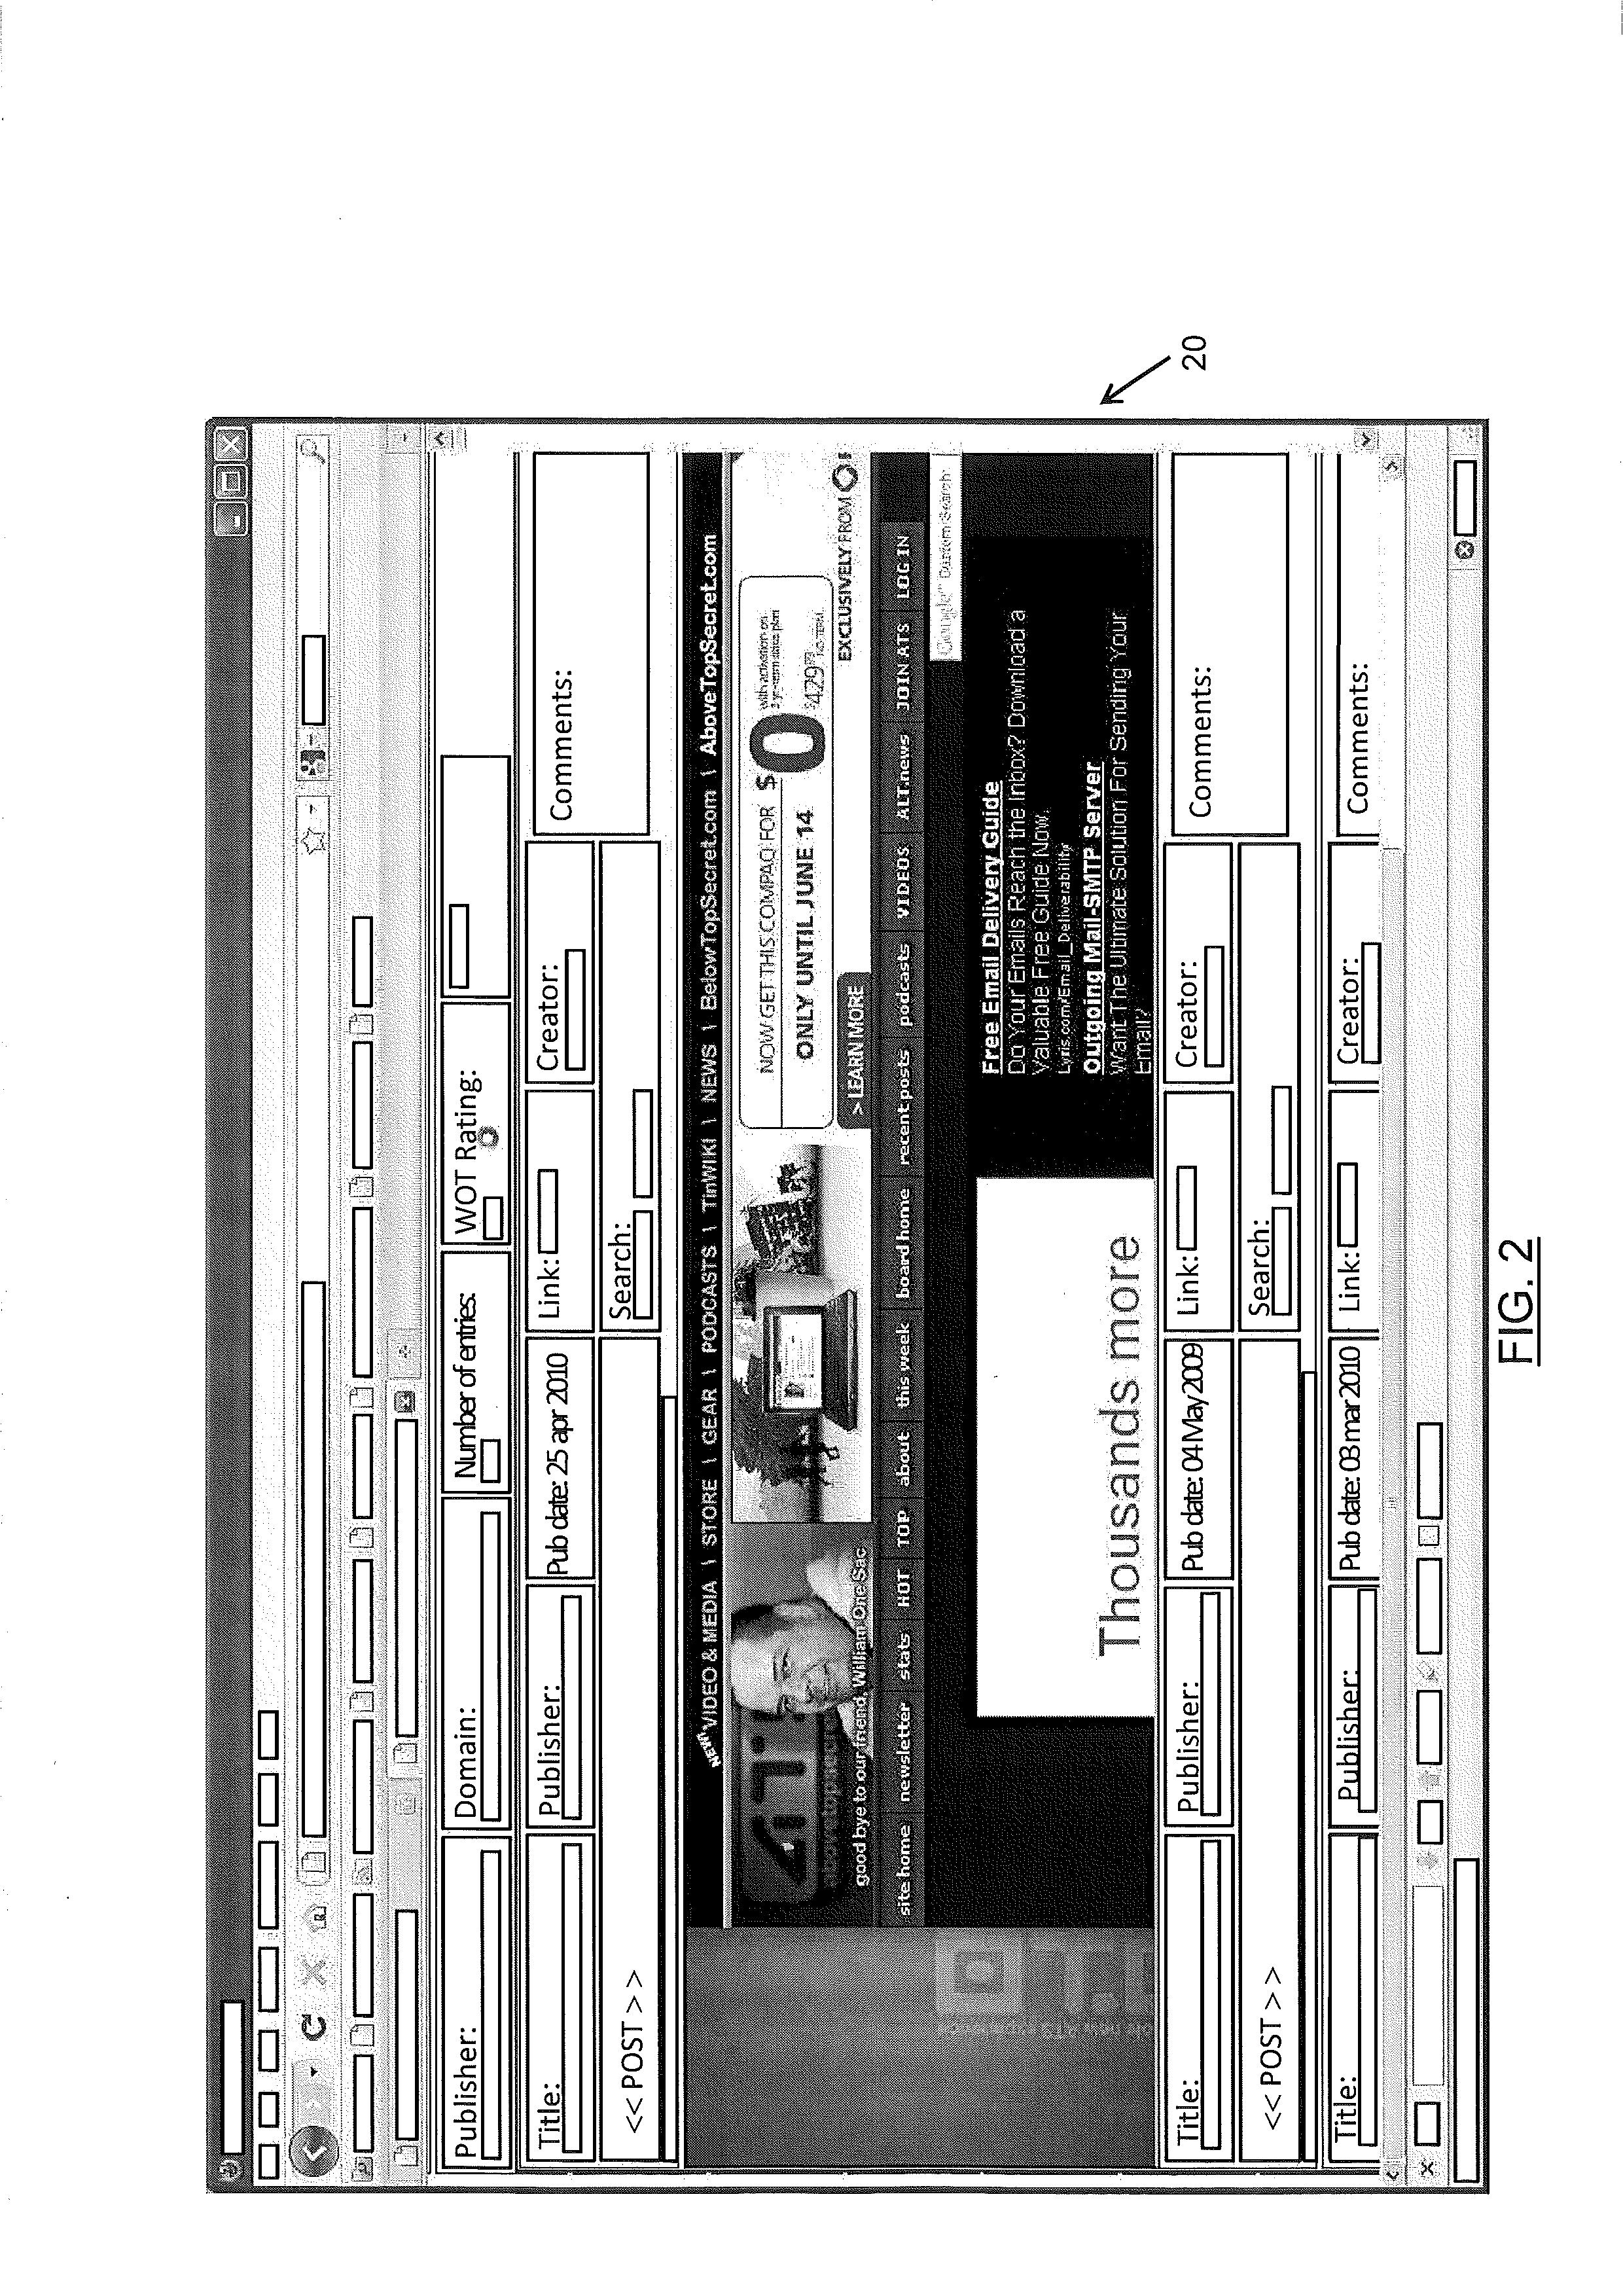 System and Method for Performing Analysis on Information, Such as Social Media